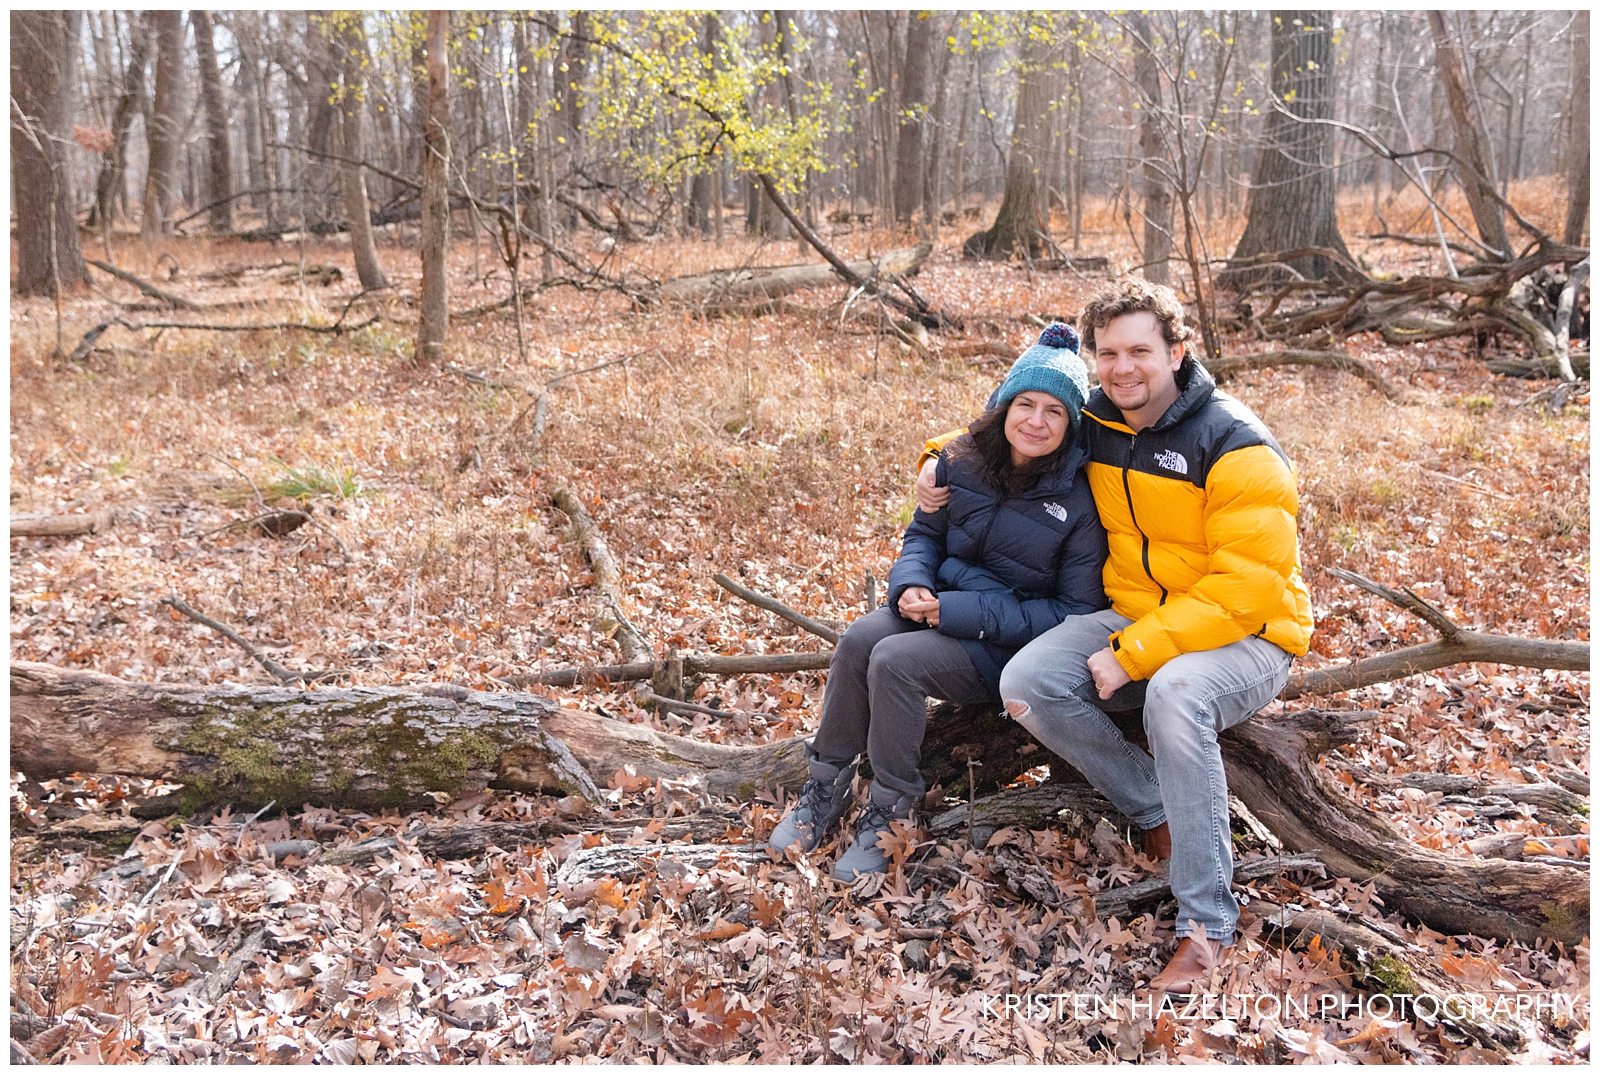 Candid portrait of a young couple in winter jackets in the woods